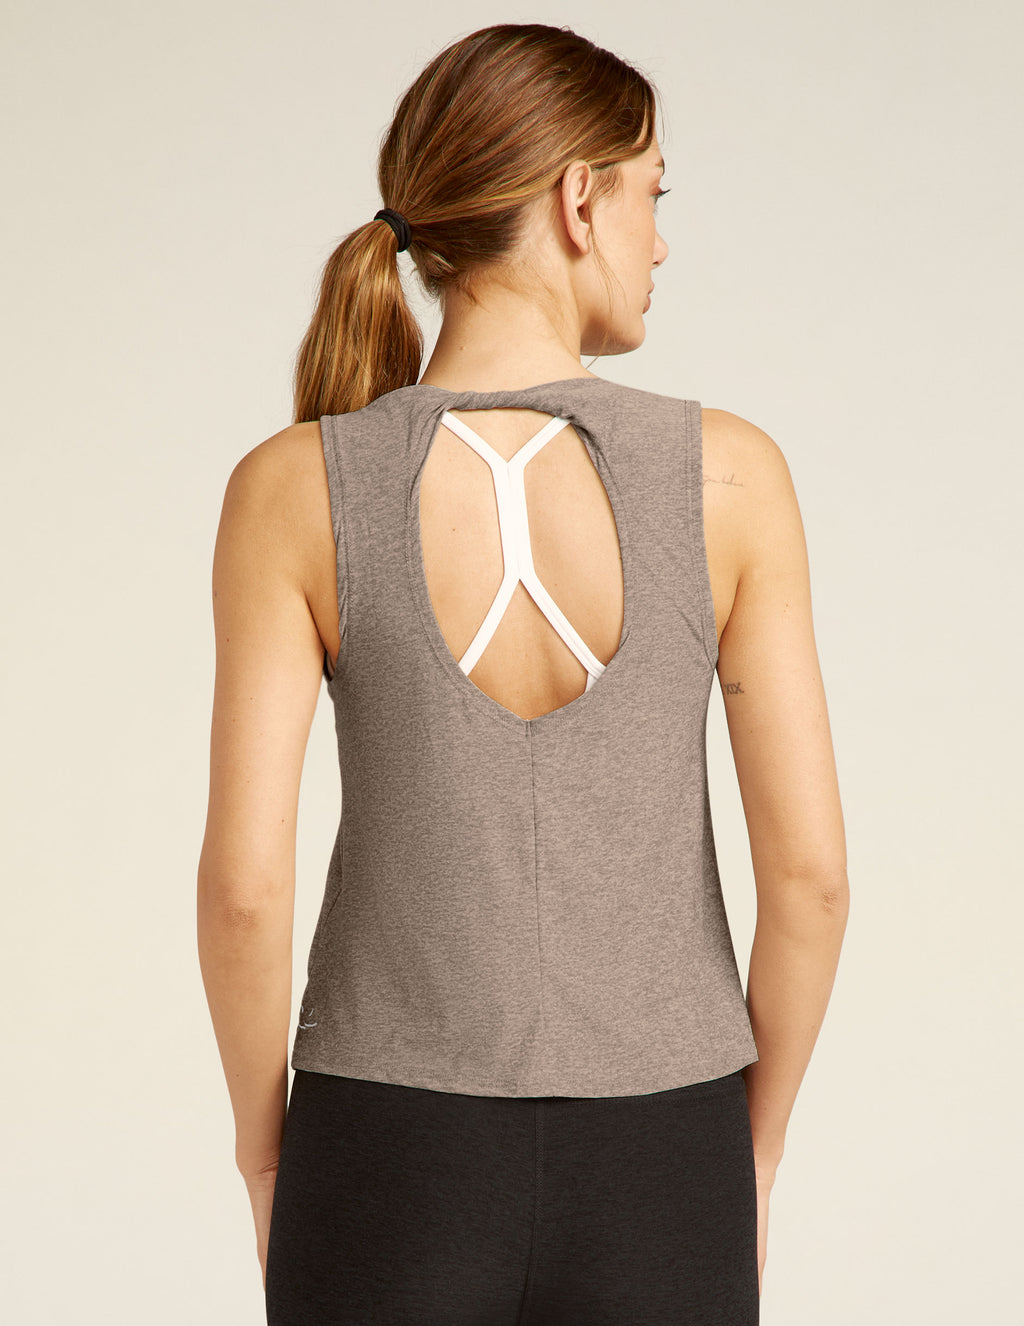 BLEVONH Womens Tank Tops with Built in Bras Yoga Kuwait